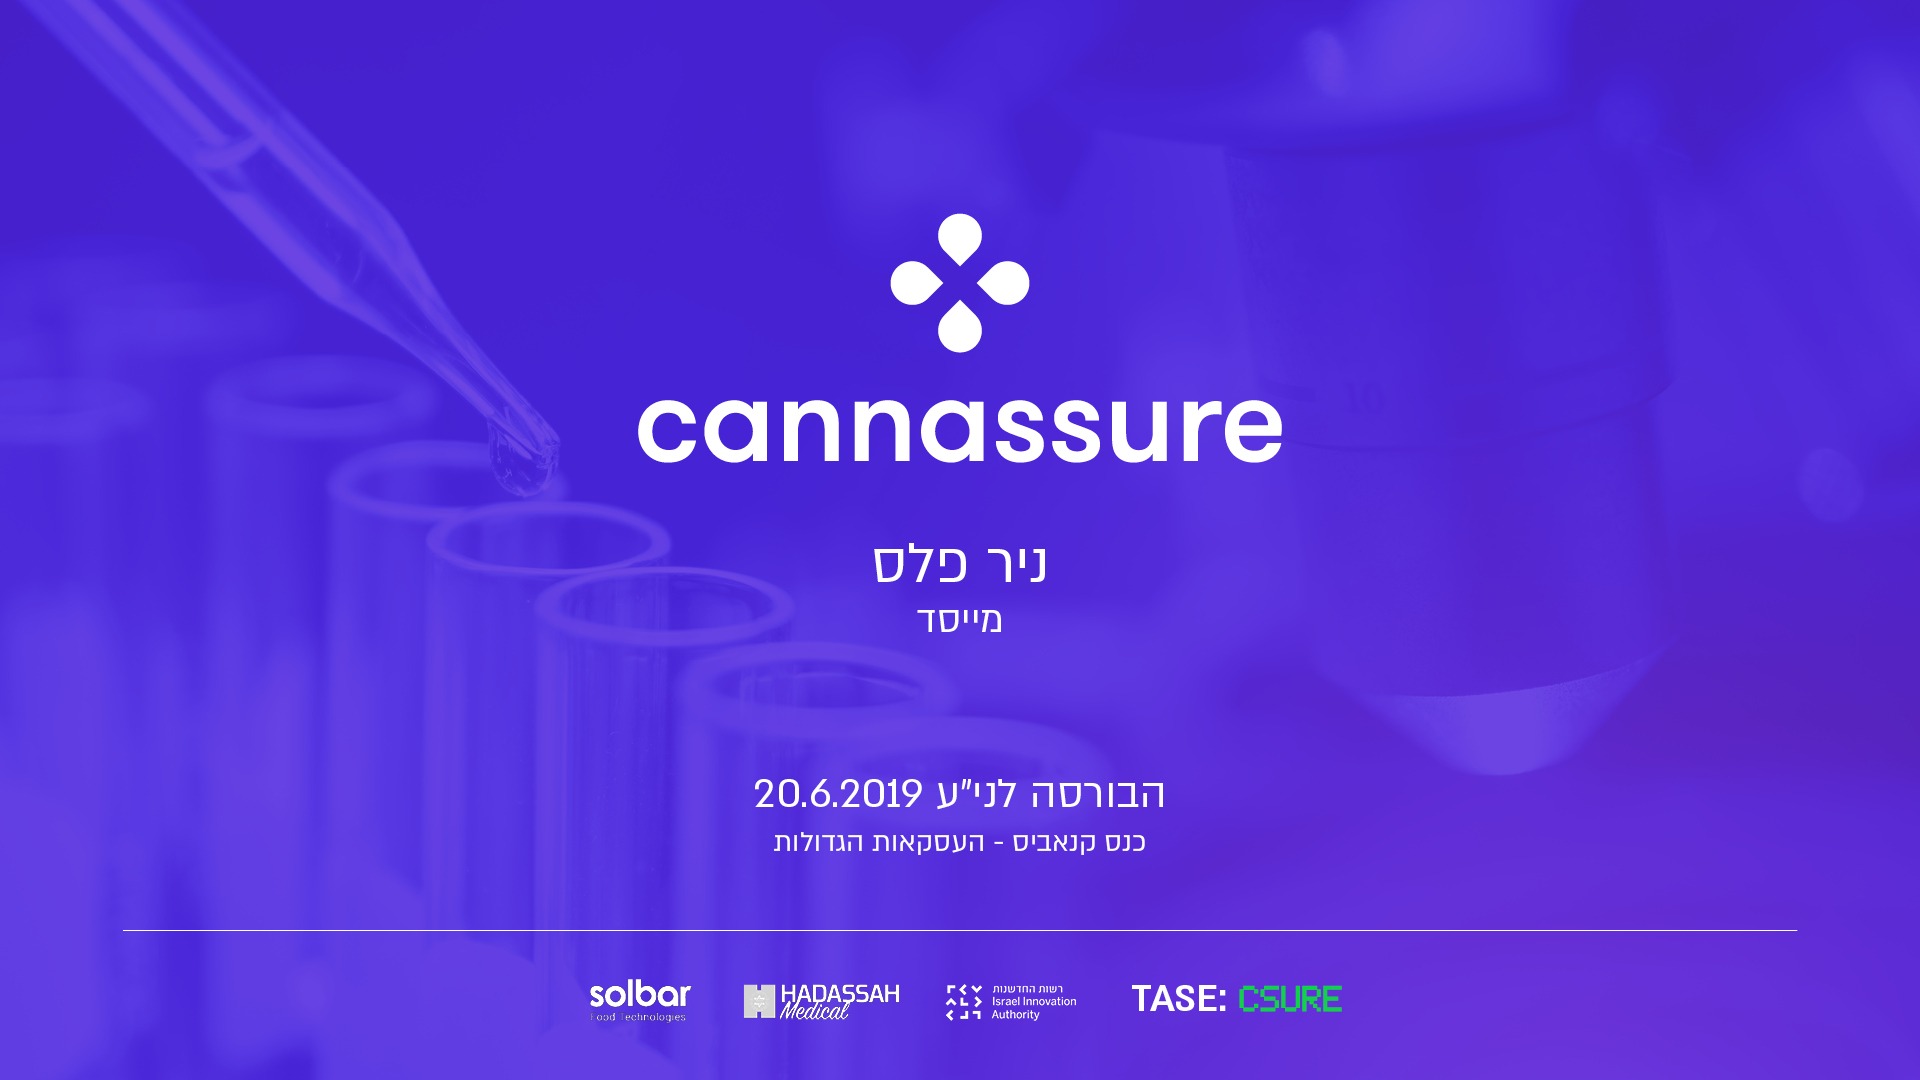 Nir Peles is talking about Cannassure in an investors event took place in TASE venue